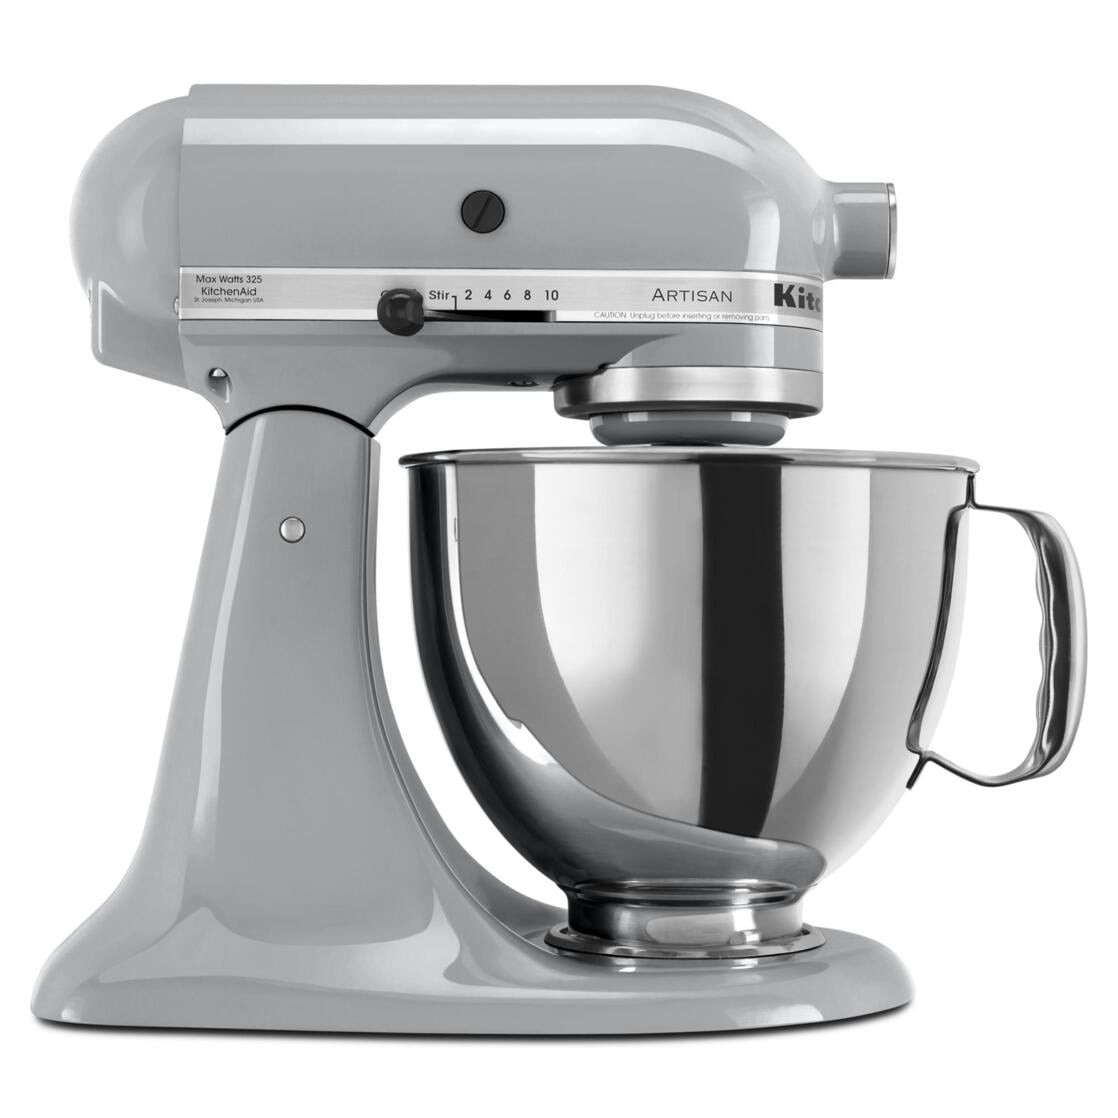 RC Willey - Make up to 9 dozen cookies in a single batch with this Aqua Sky  KitchenAid® Artisan® Series 5 Quart Tilt-Head Stand Mixer from RC Willey!🍪   KitchenAid